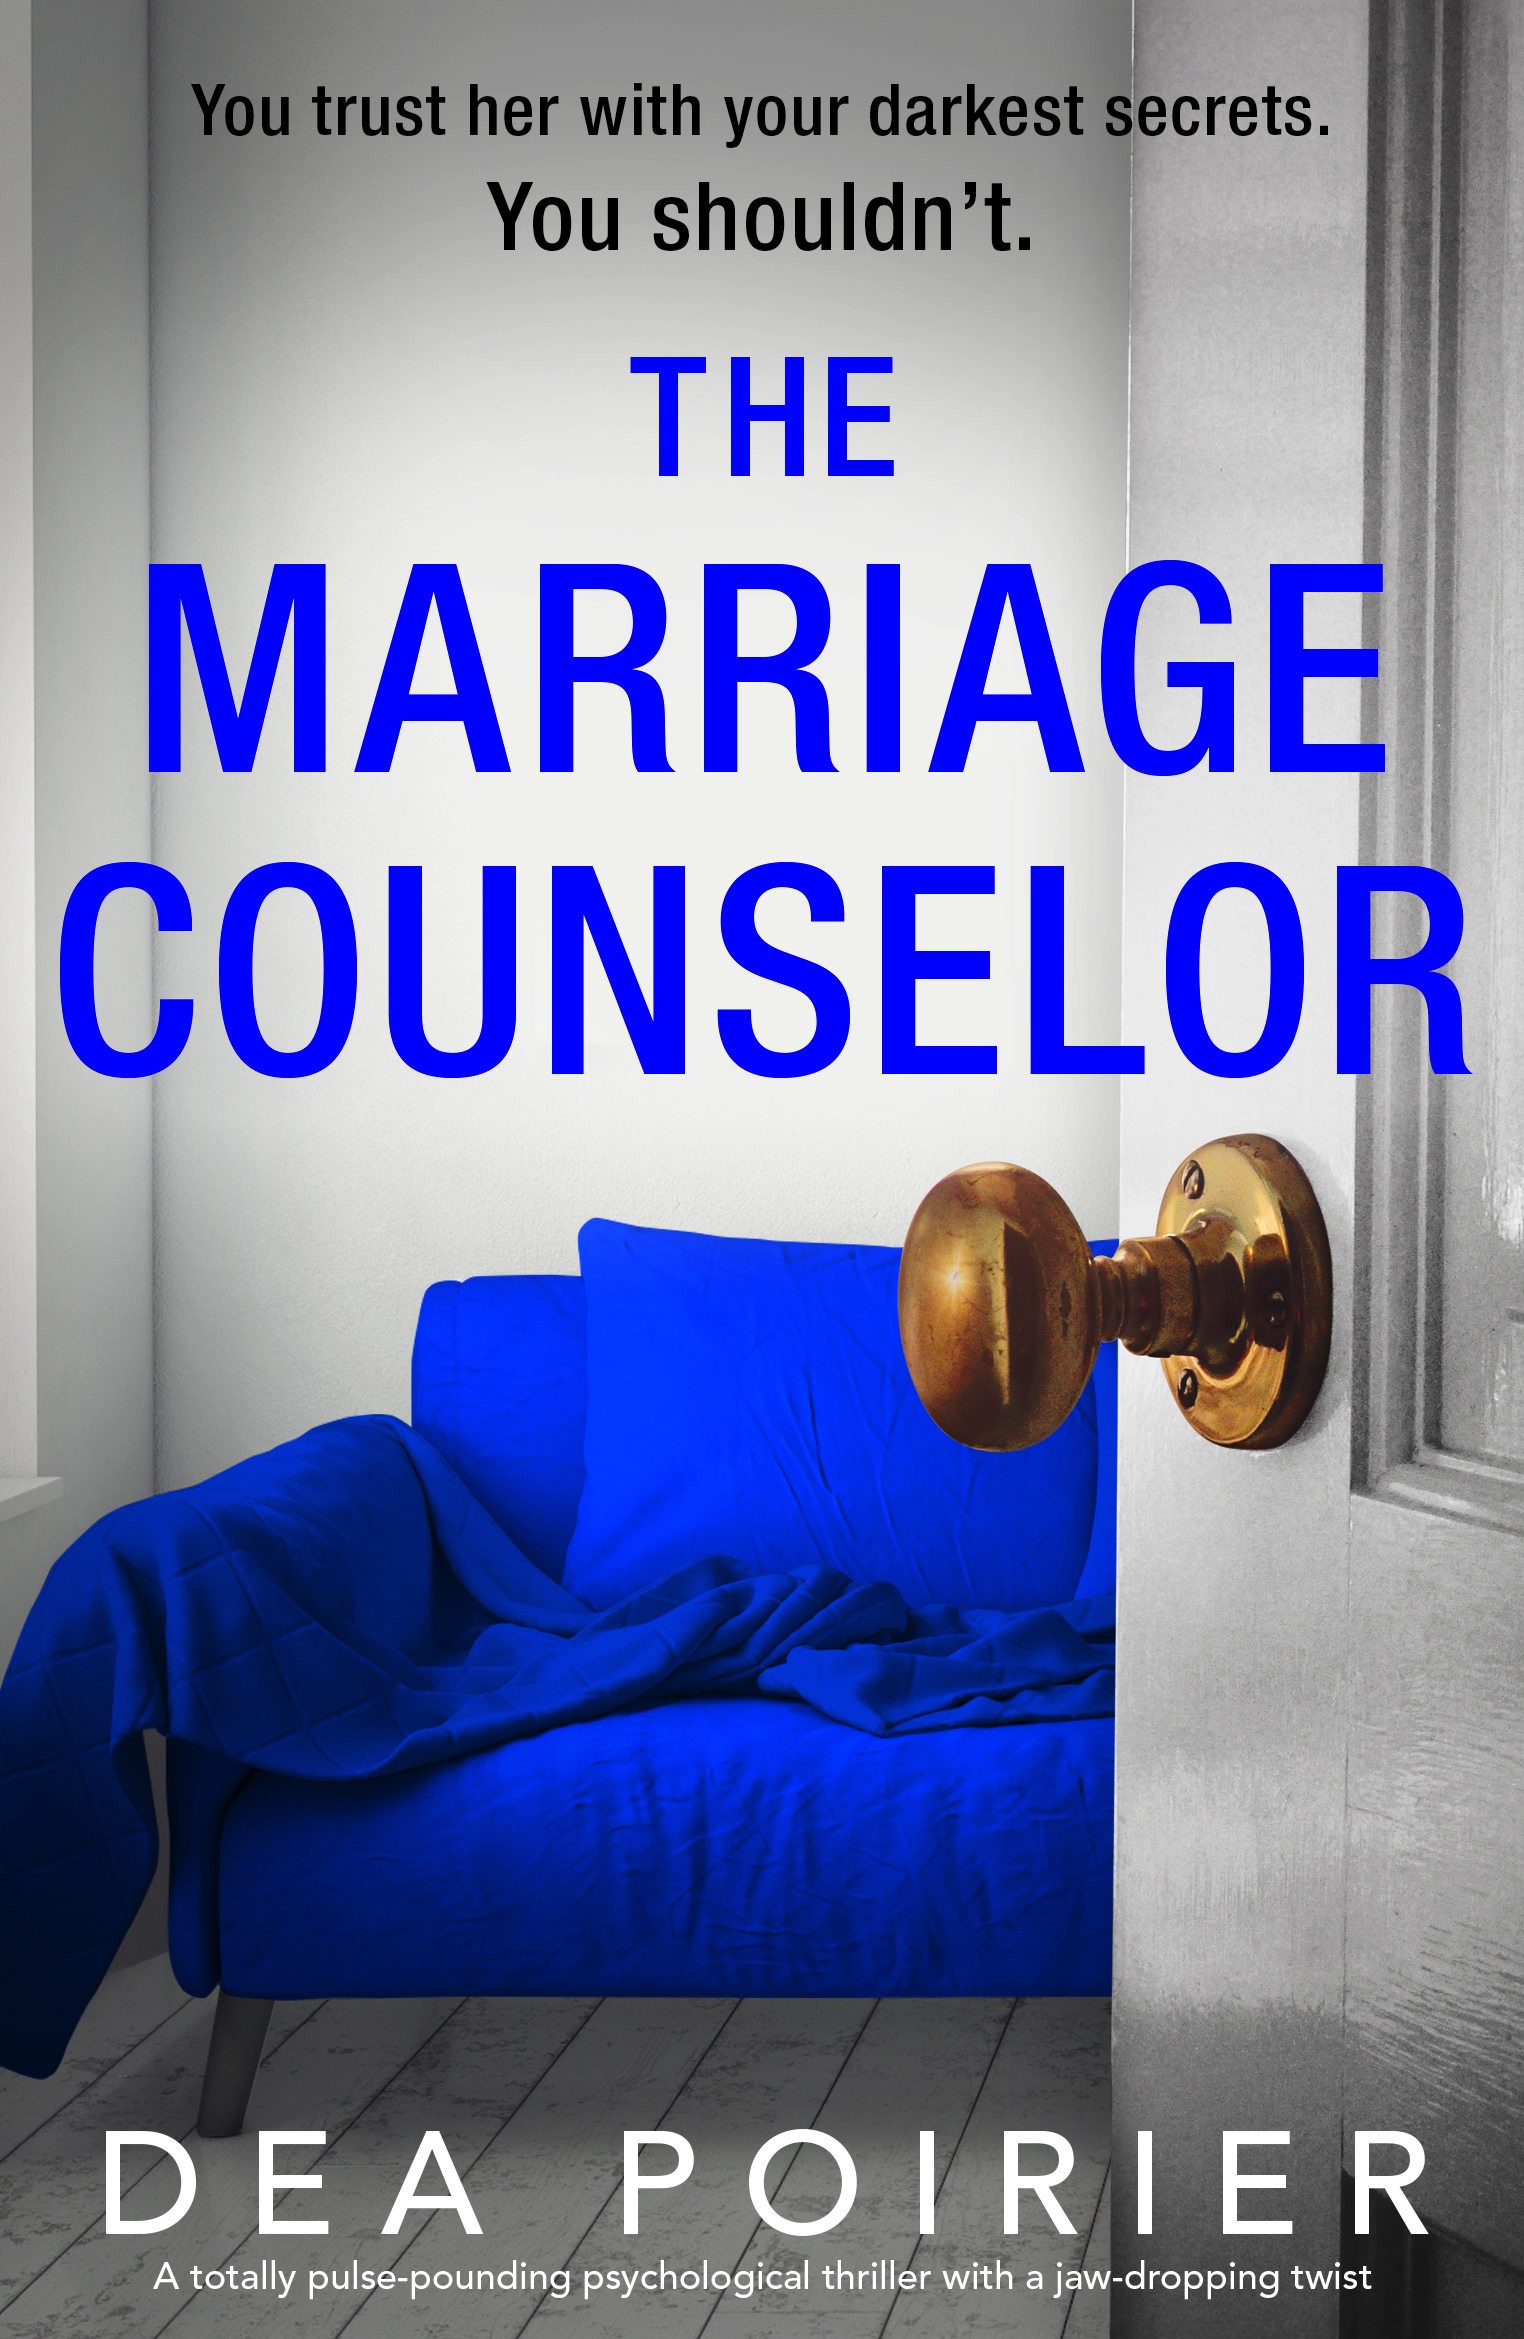 The Marriage Counselor book cover